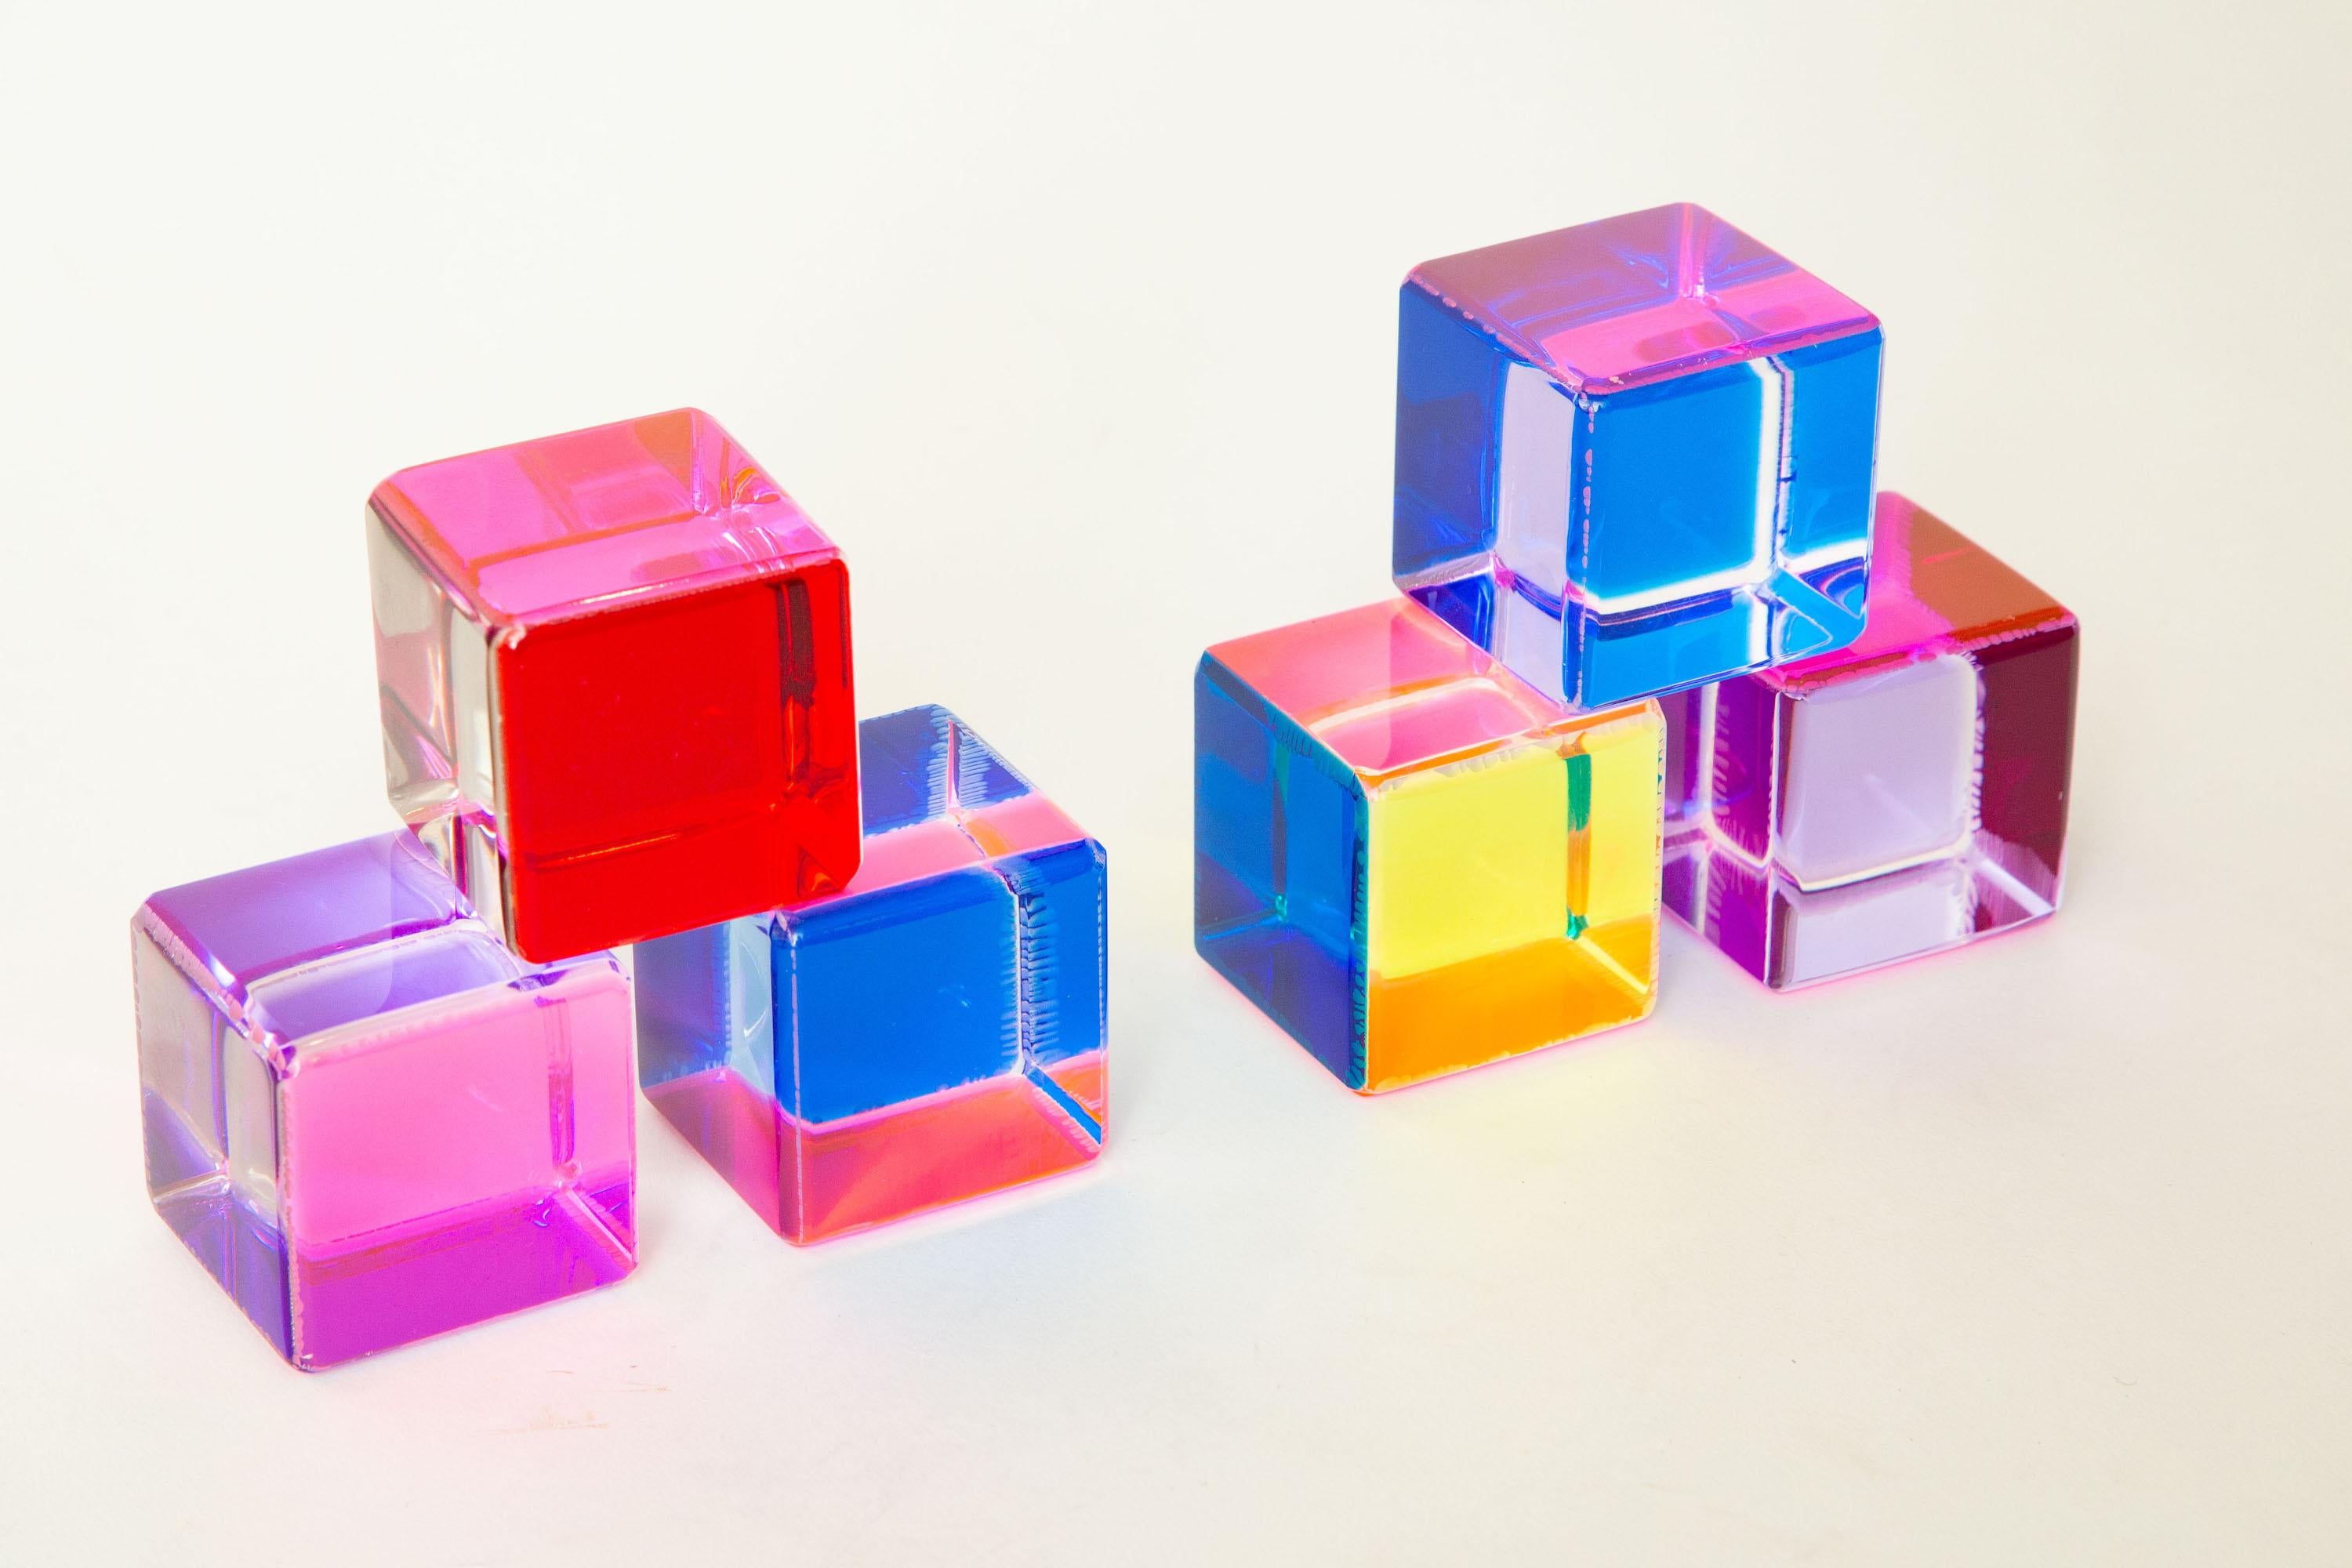 This set of six unsigned Vasa Mihich laminated square lucite cube sculptures are from the 1990s. The colors change with the play of light and planes of movement. Predominant colors are purples, pinks, reds, yellow, blue, orange and etc. They are